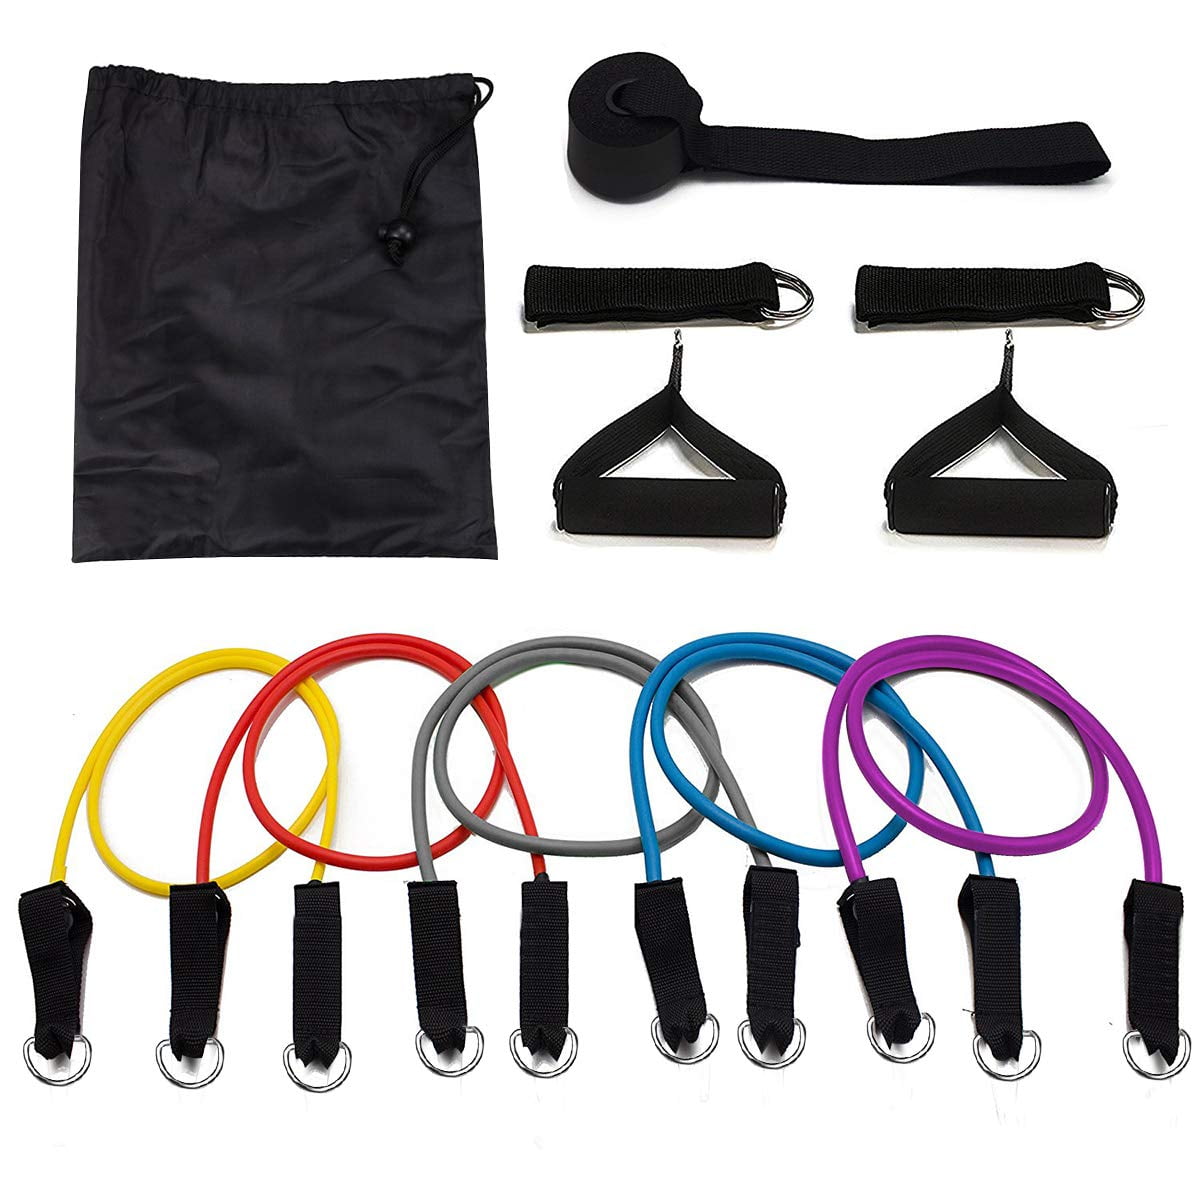 Xsong Resistance Bands 100lb with Handle Door Anchor Ankle Straps Portable Accessories 11pcs for Home Gym 